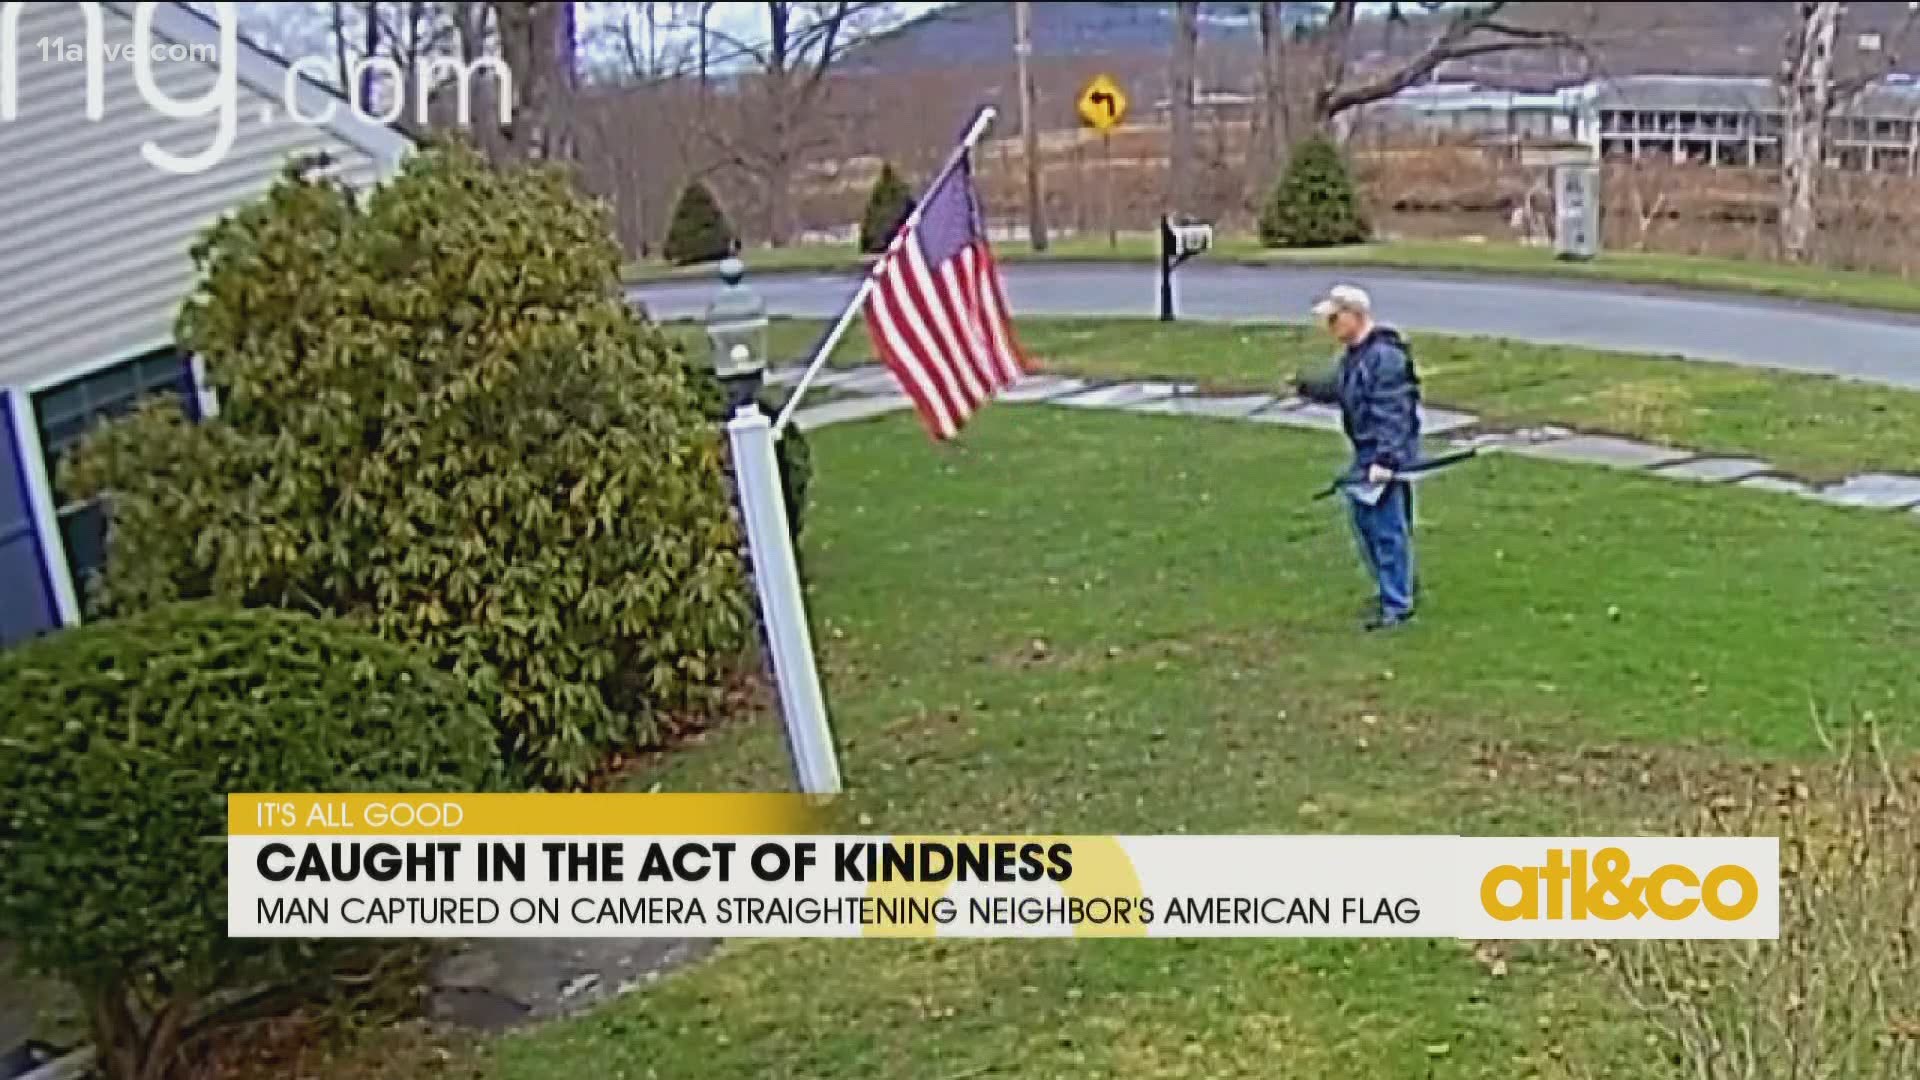 An act of kindness caught on camera. Watch this neighbor straighten out the American flag and salute before going on his way.